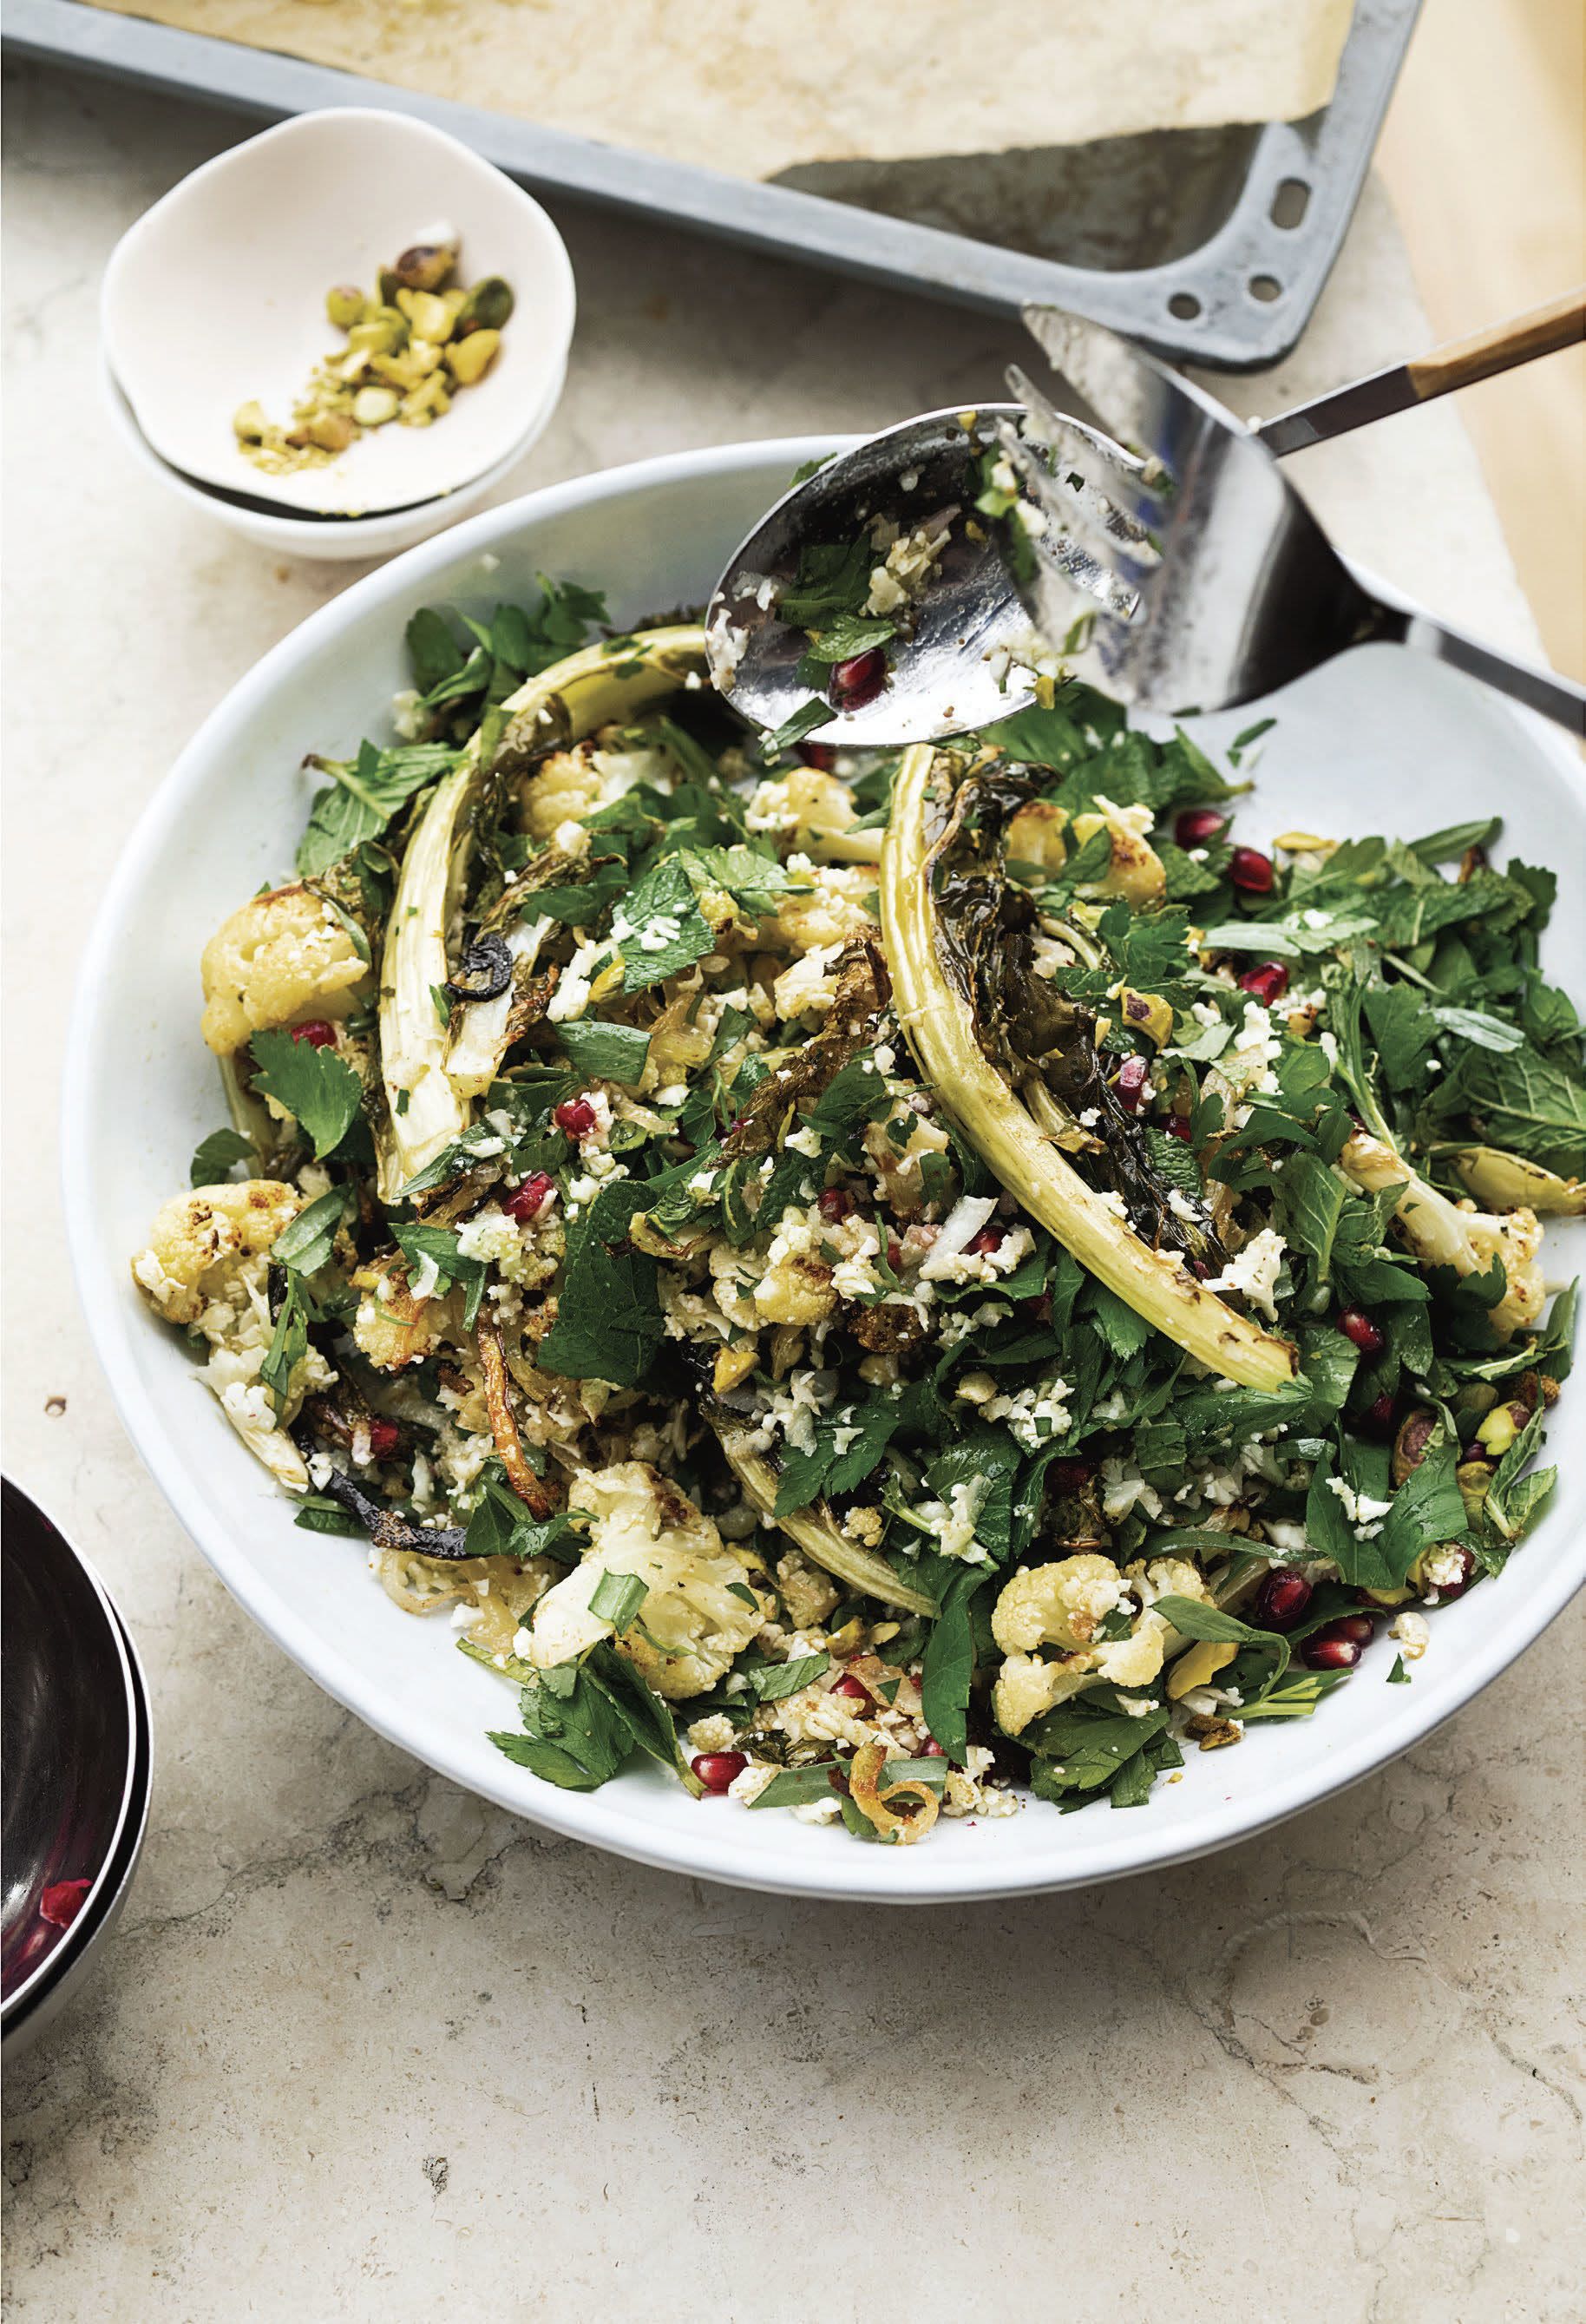 Easy does it: seven simple new Yotam Ottolenghi recipes, Food